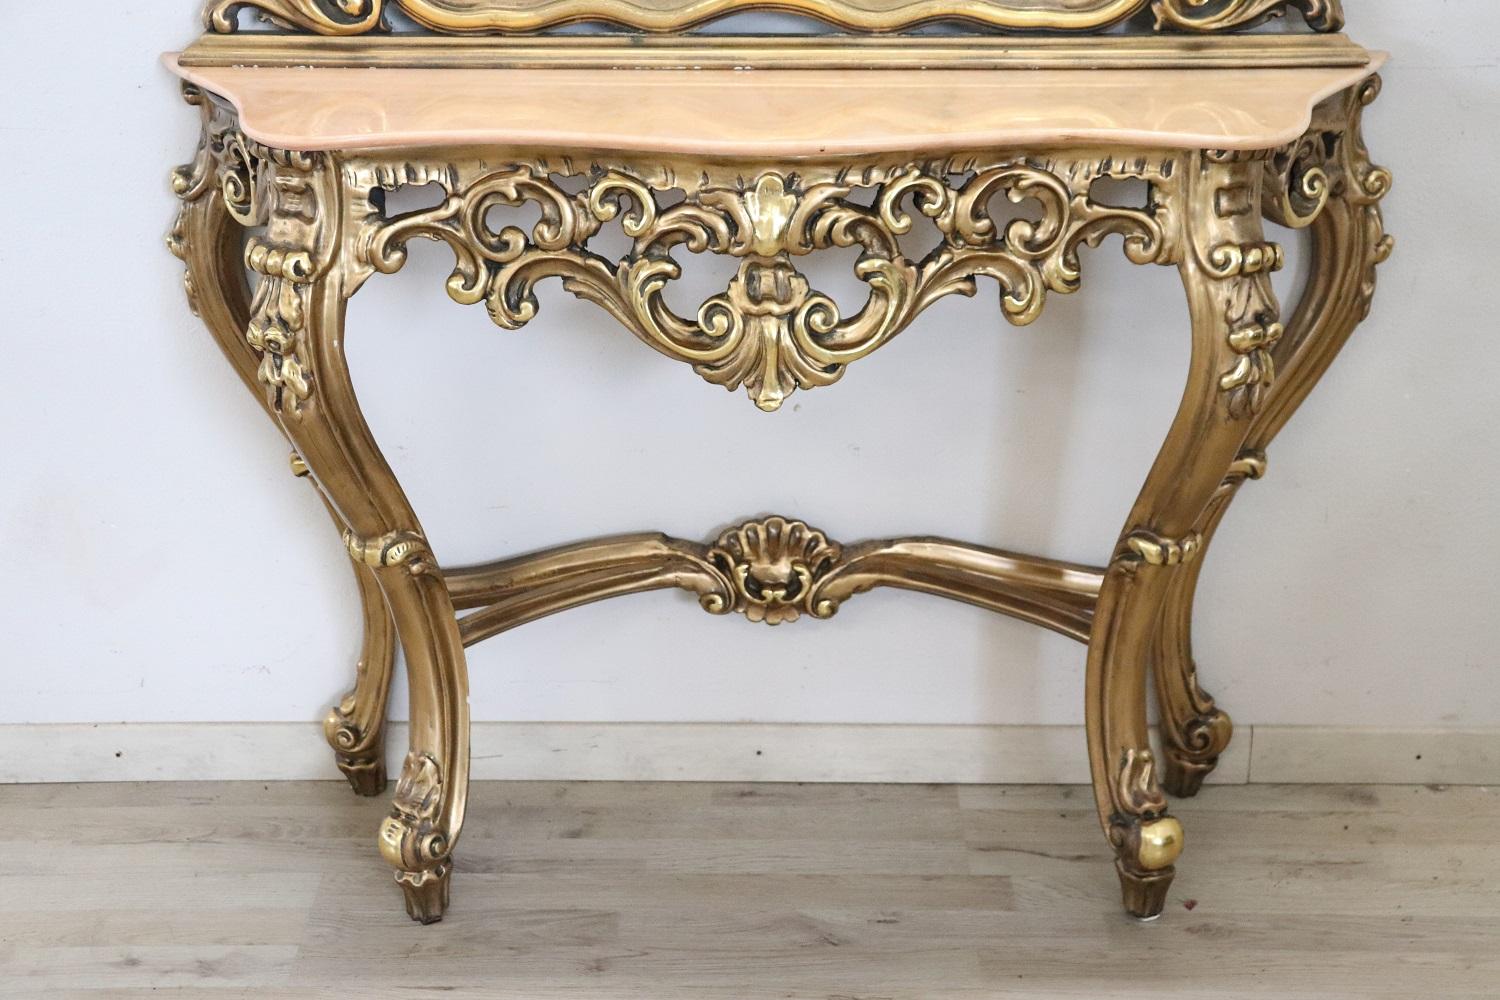 Italian baroque style console table 1930s. The console is made of solid carved wood with many curls and swirls of decoration. The wood is completely gilded and increases the importance of this console. Perfect to be placed even in representative